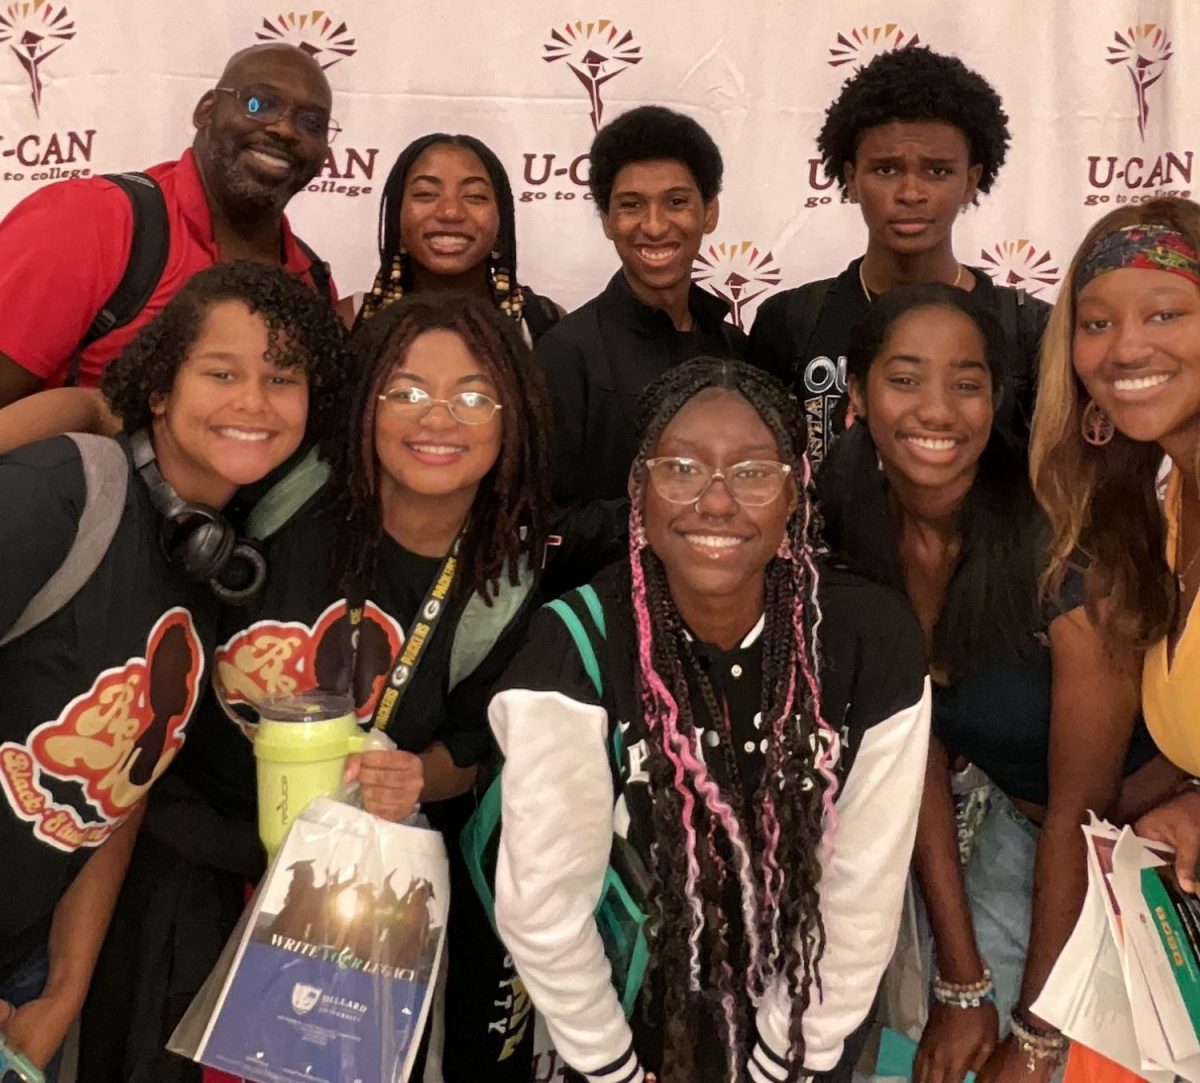 African+American+students+from+C.+K.+McClatchy+attended+the+HBCU+fair+at+Burbank+High+on+Sept.+19